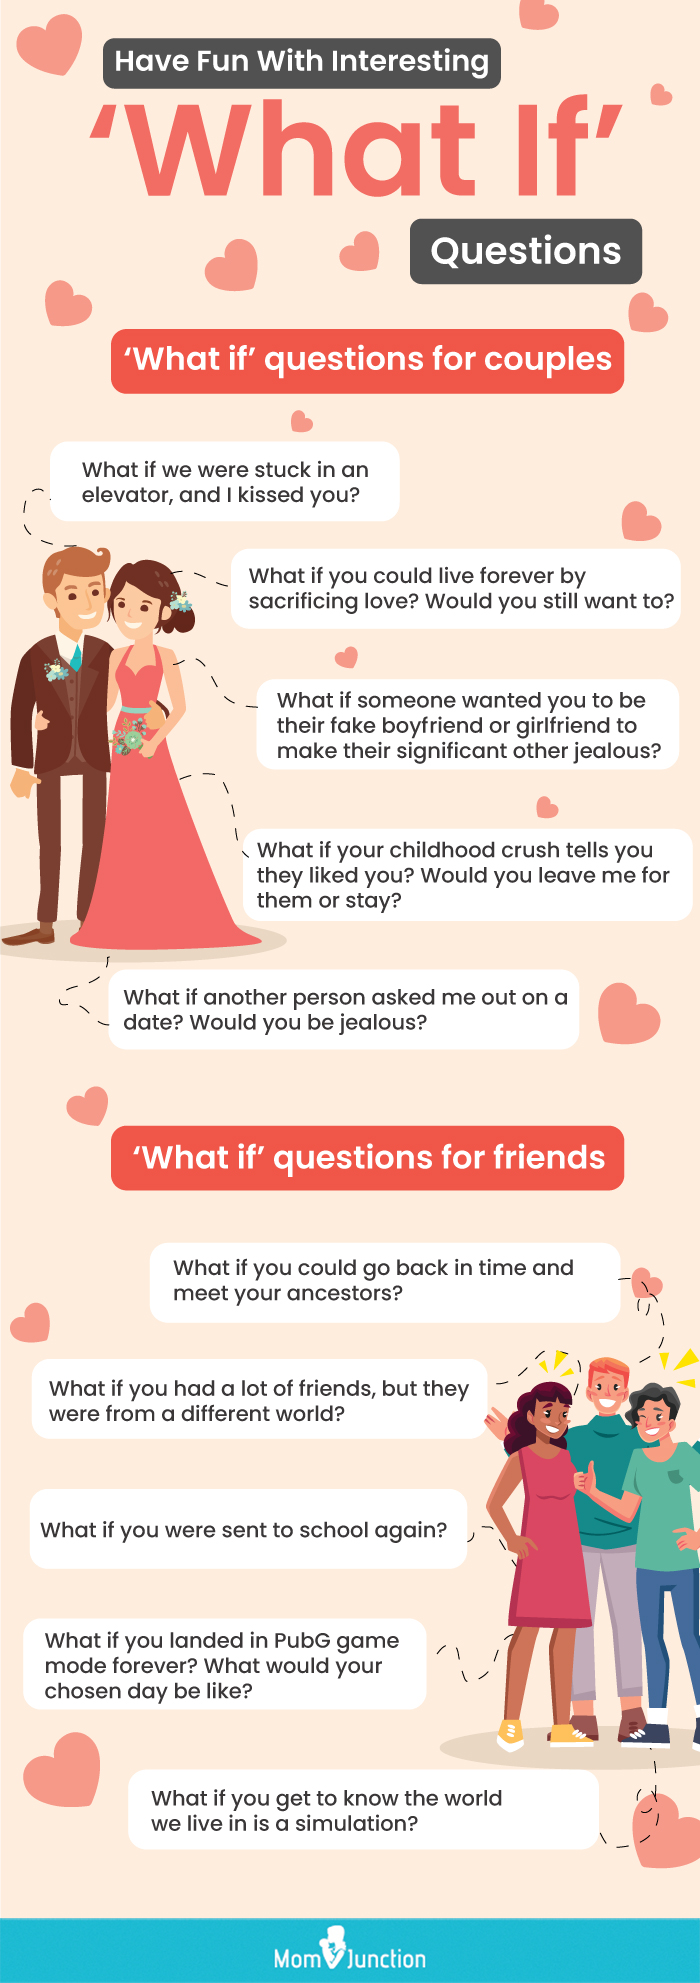 How Well Do You Know Me Questions for Couples